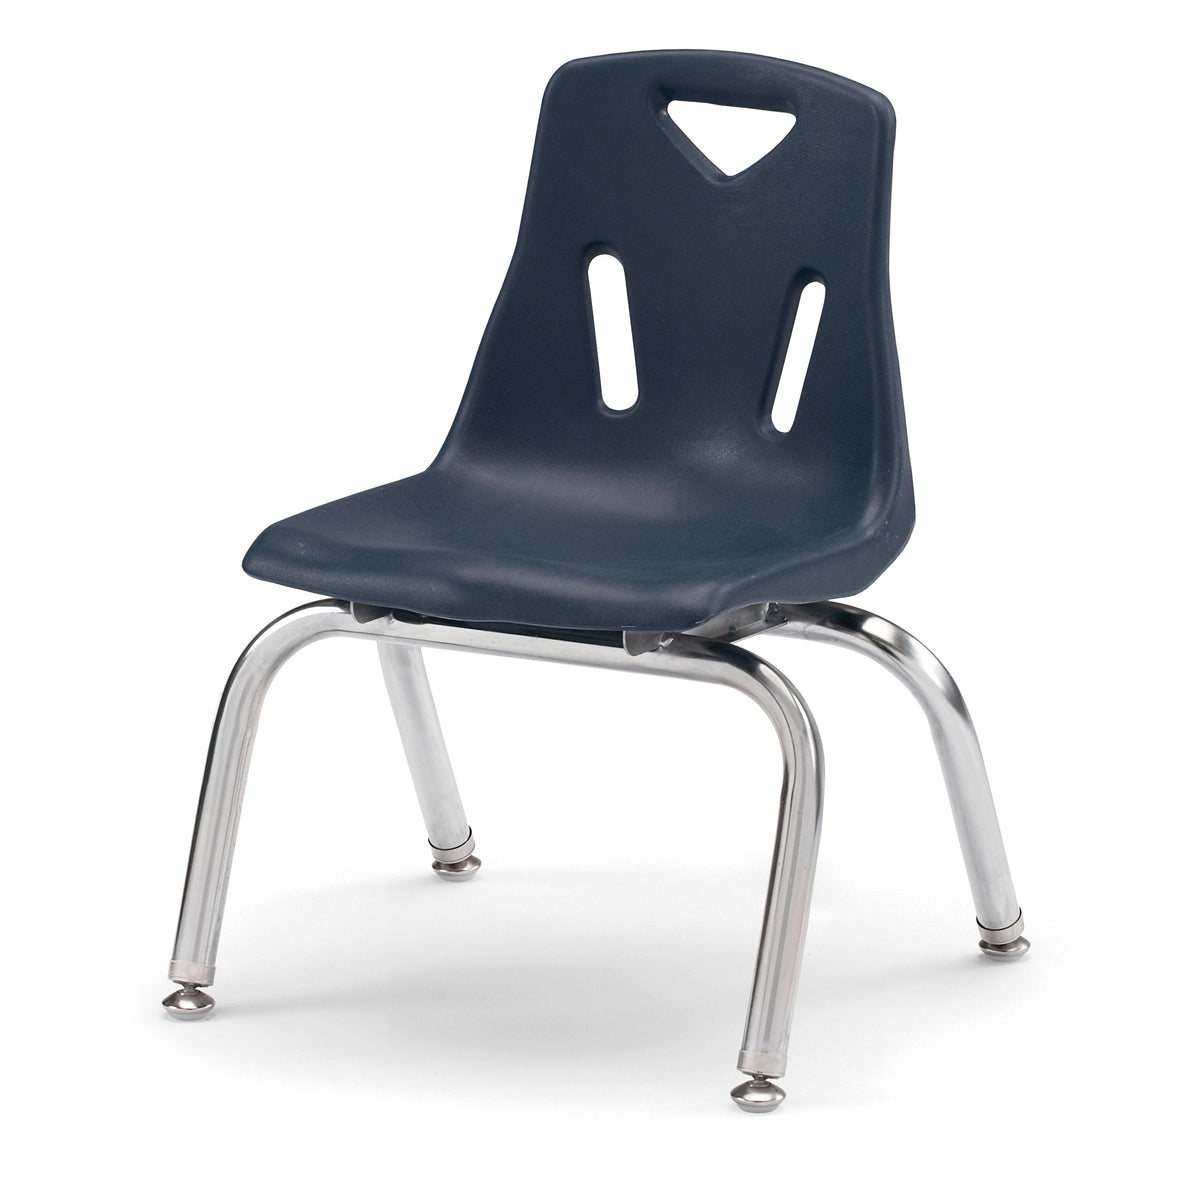 8140JC1112, Berries Stacking Chair with Chrome-Plated Legs - 10" Ht - Navy